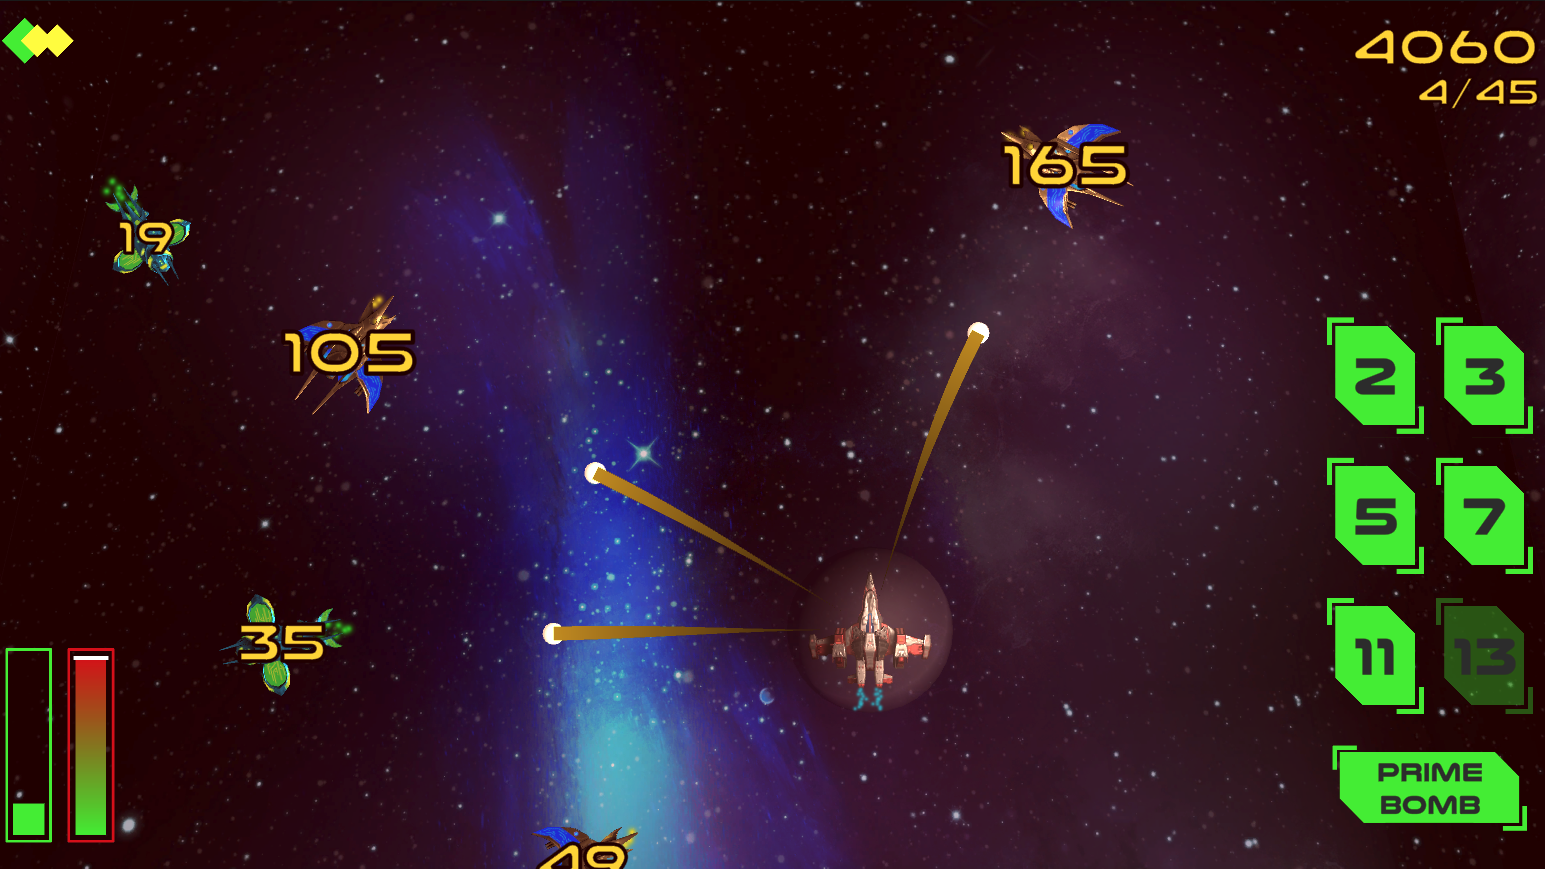 The player's ship is firing multiple torpedoes at enemies with 5 as a factor on the screen